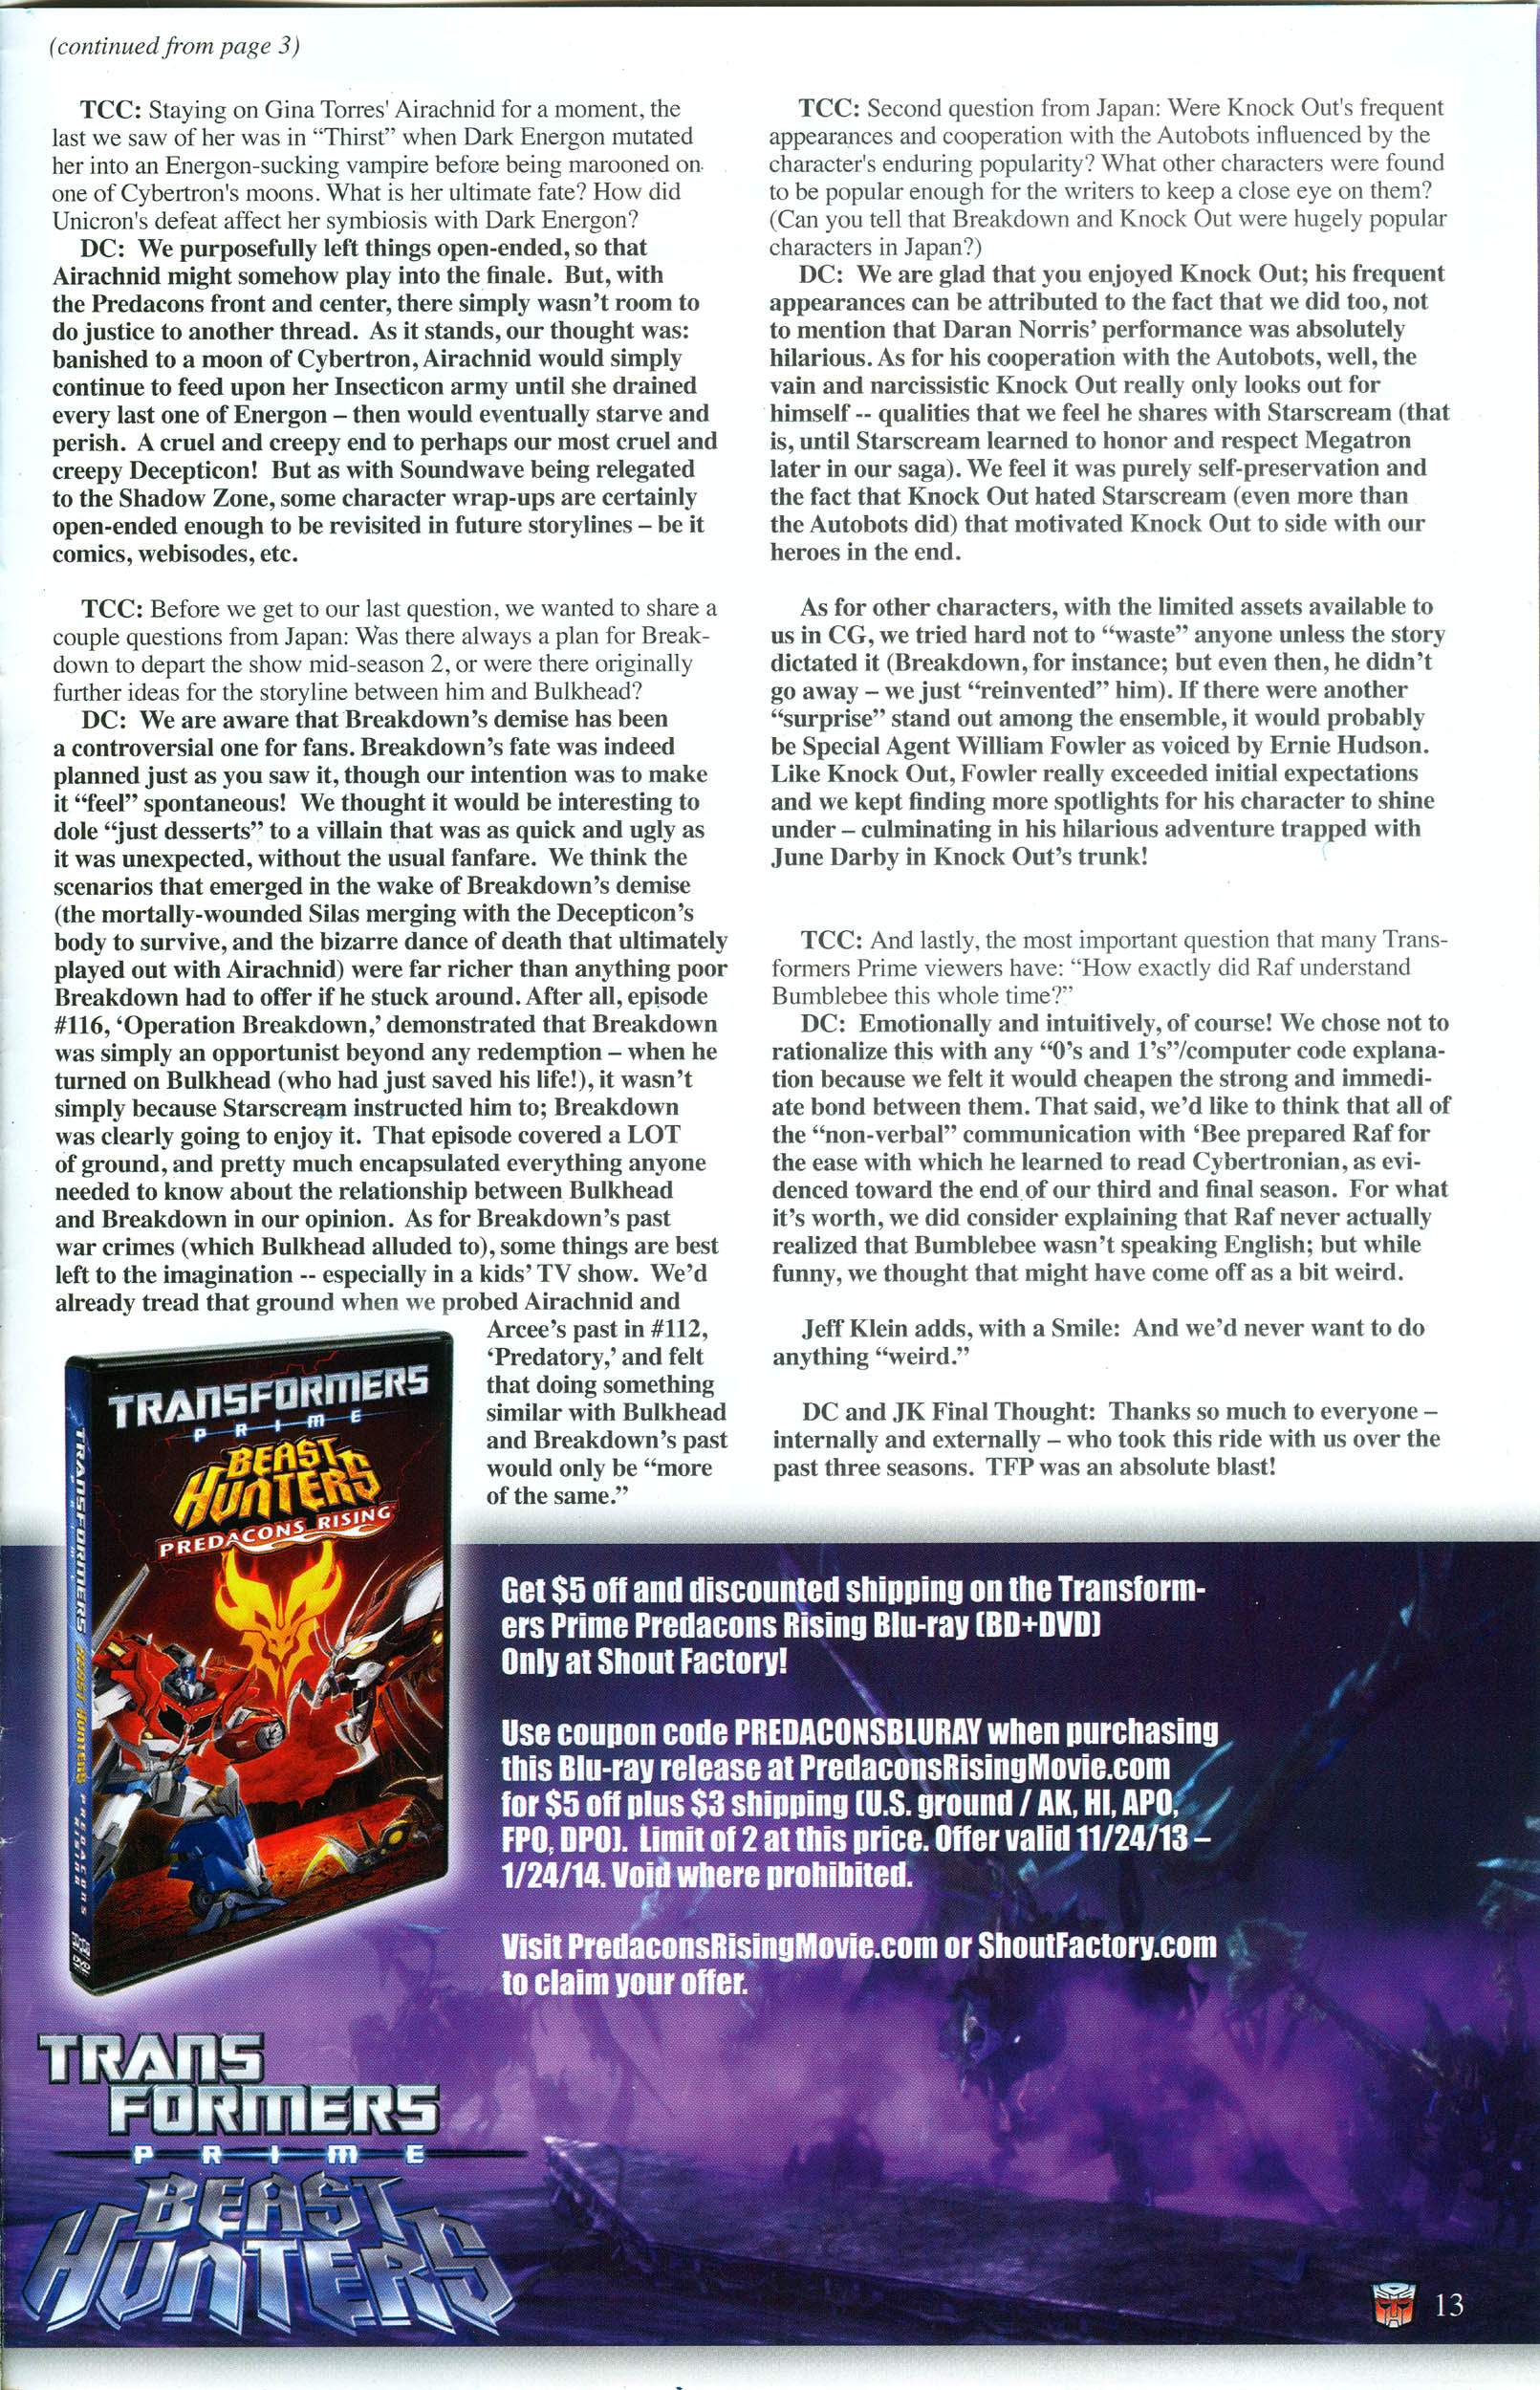 Read online Transformers: Collectors' Club comic -  Issue #54 - 13